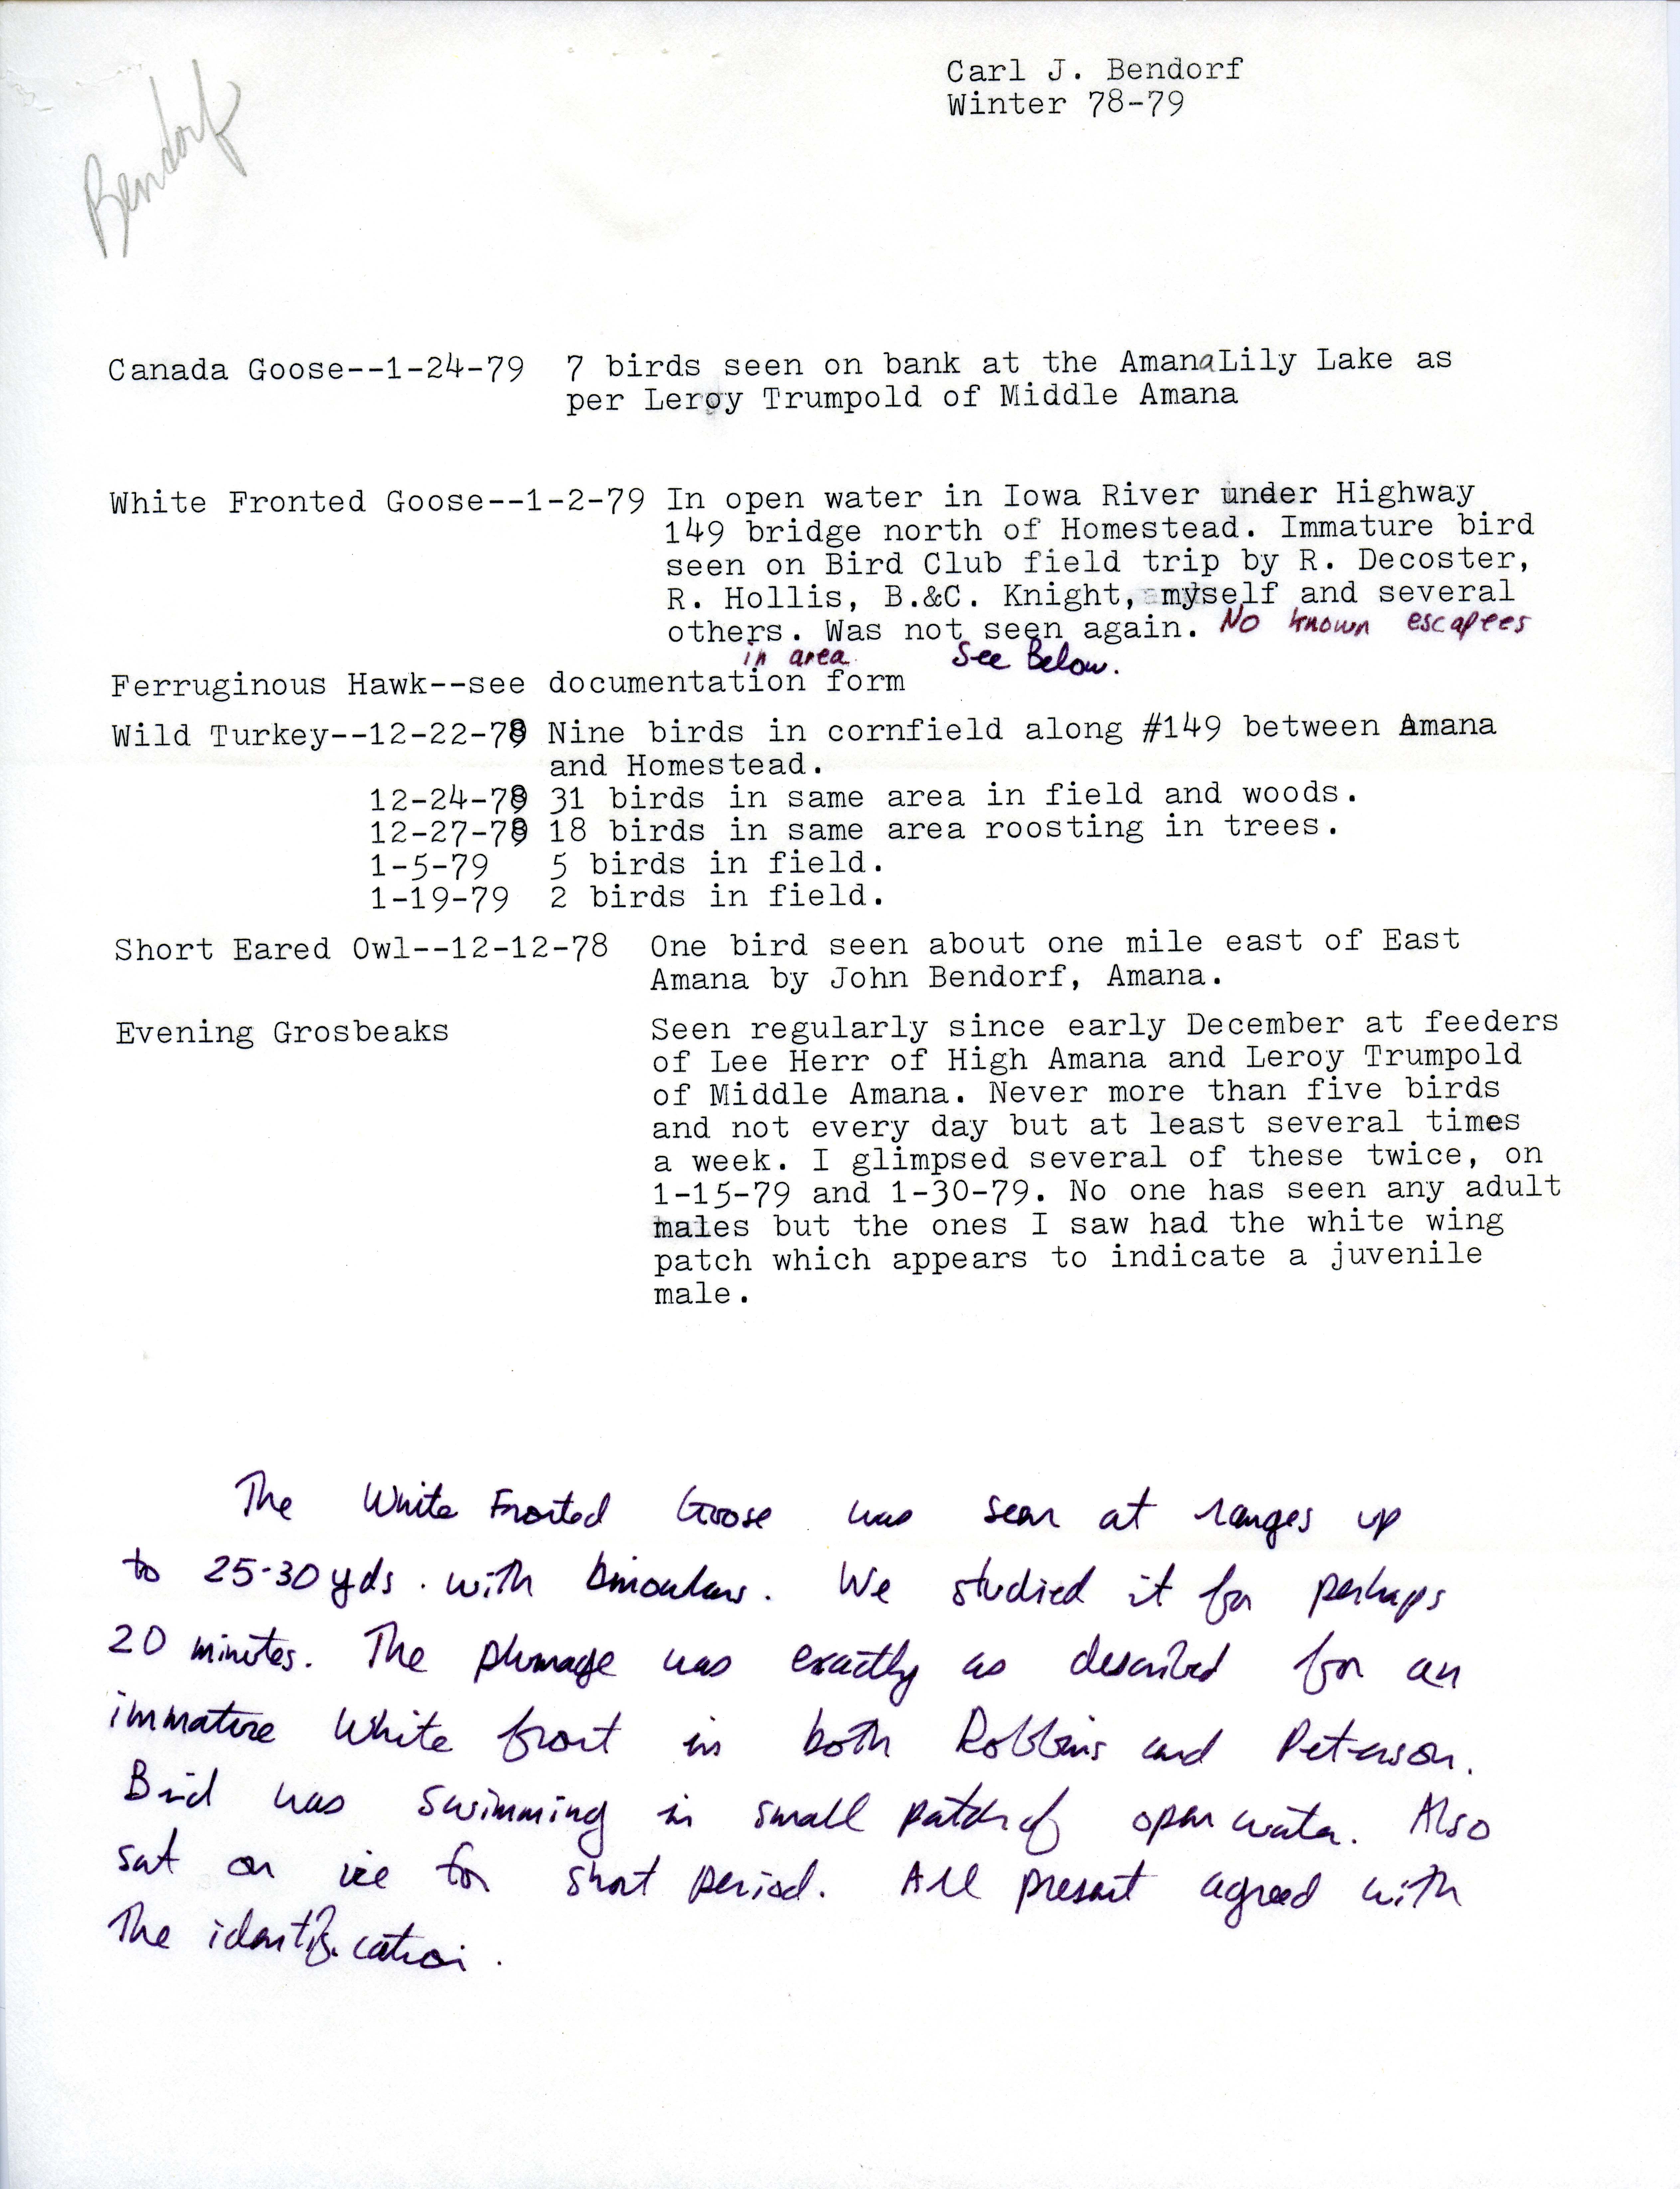 Field notes contributed by Carl J. Bendorf, winter 1978-1979